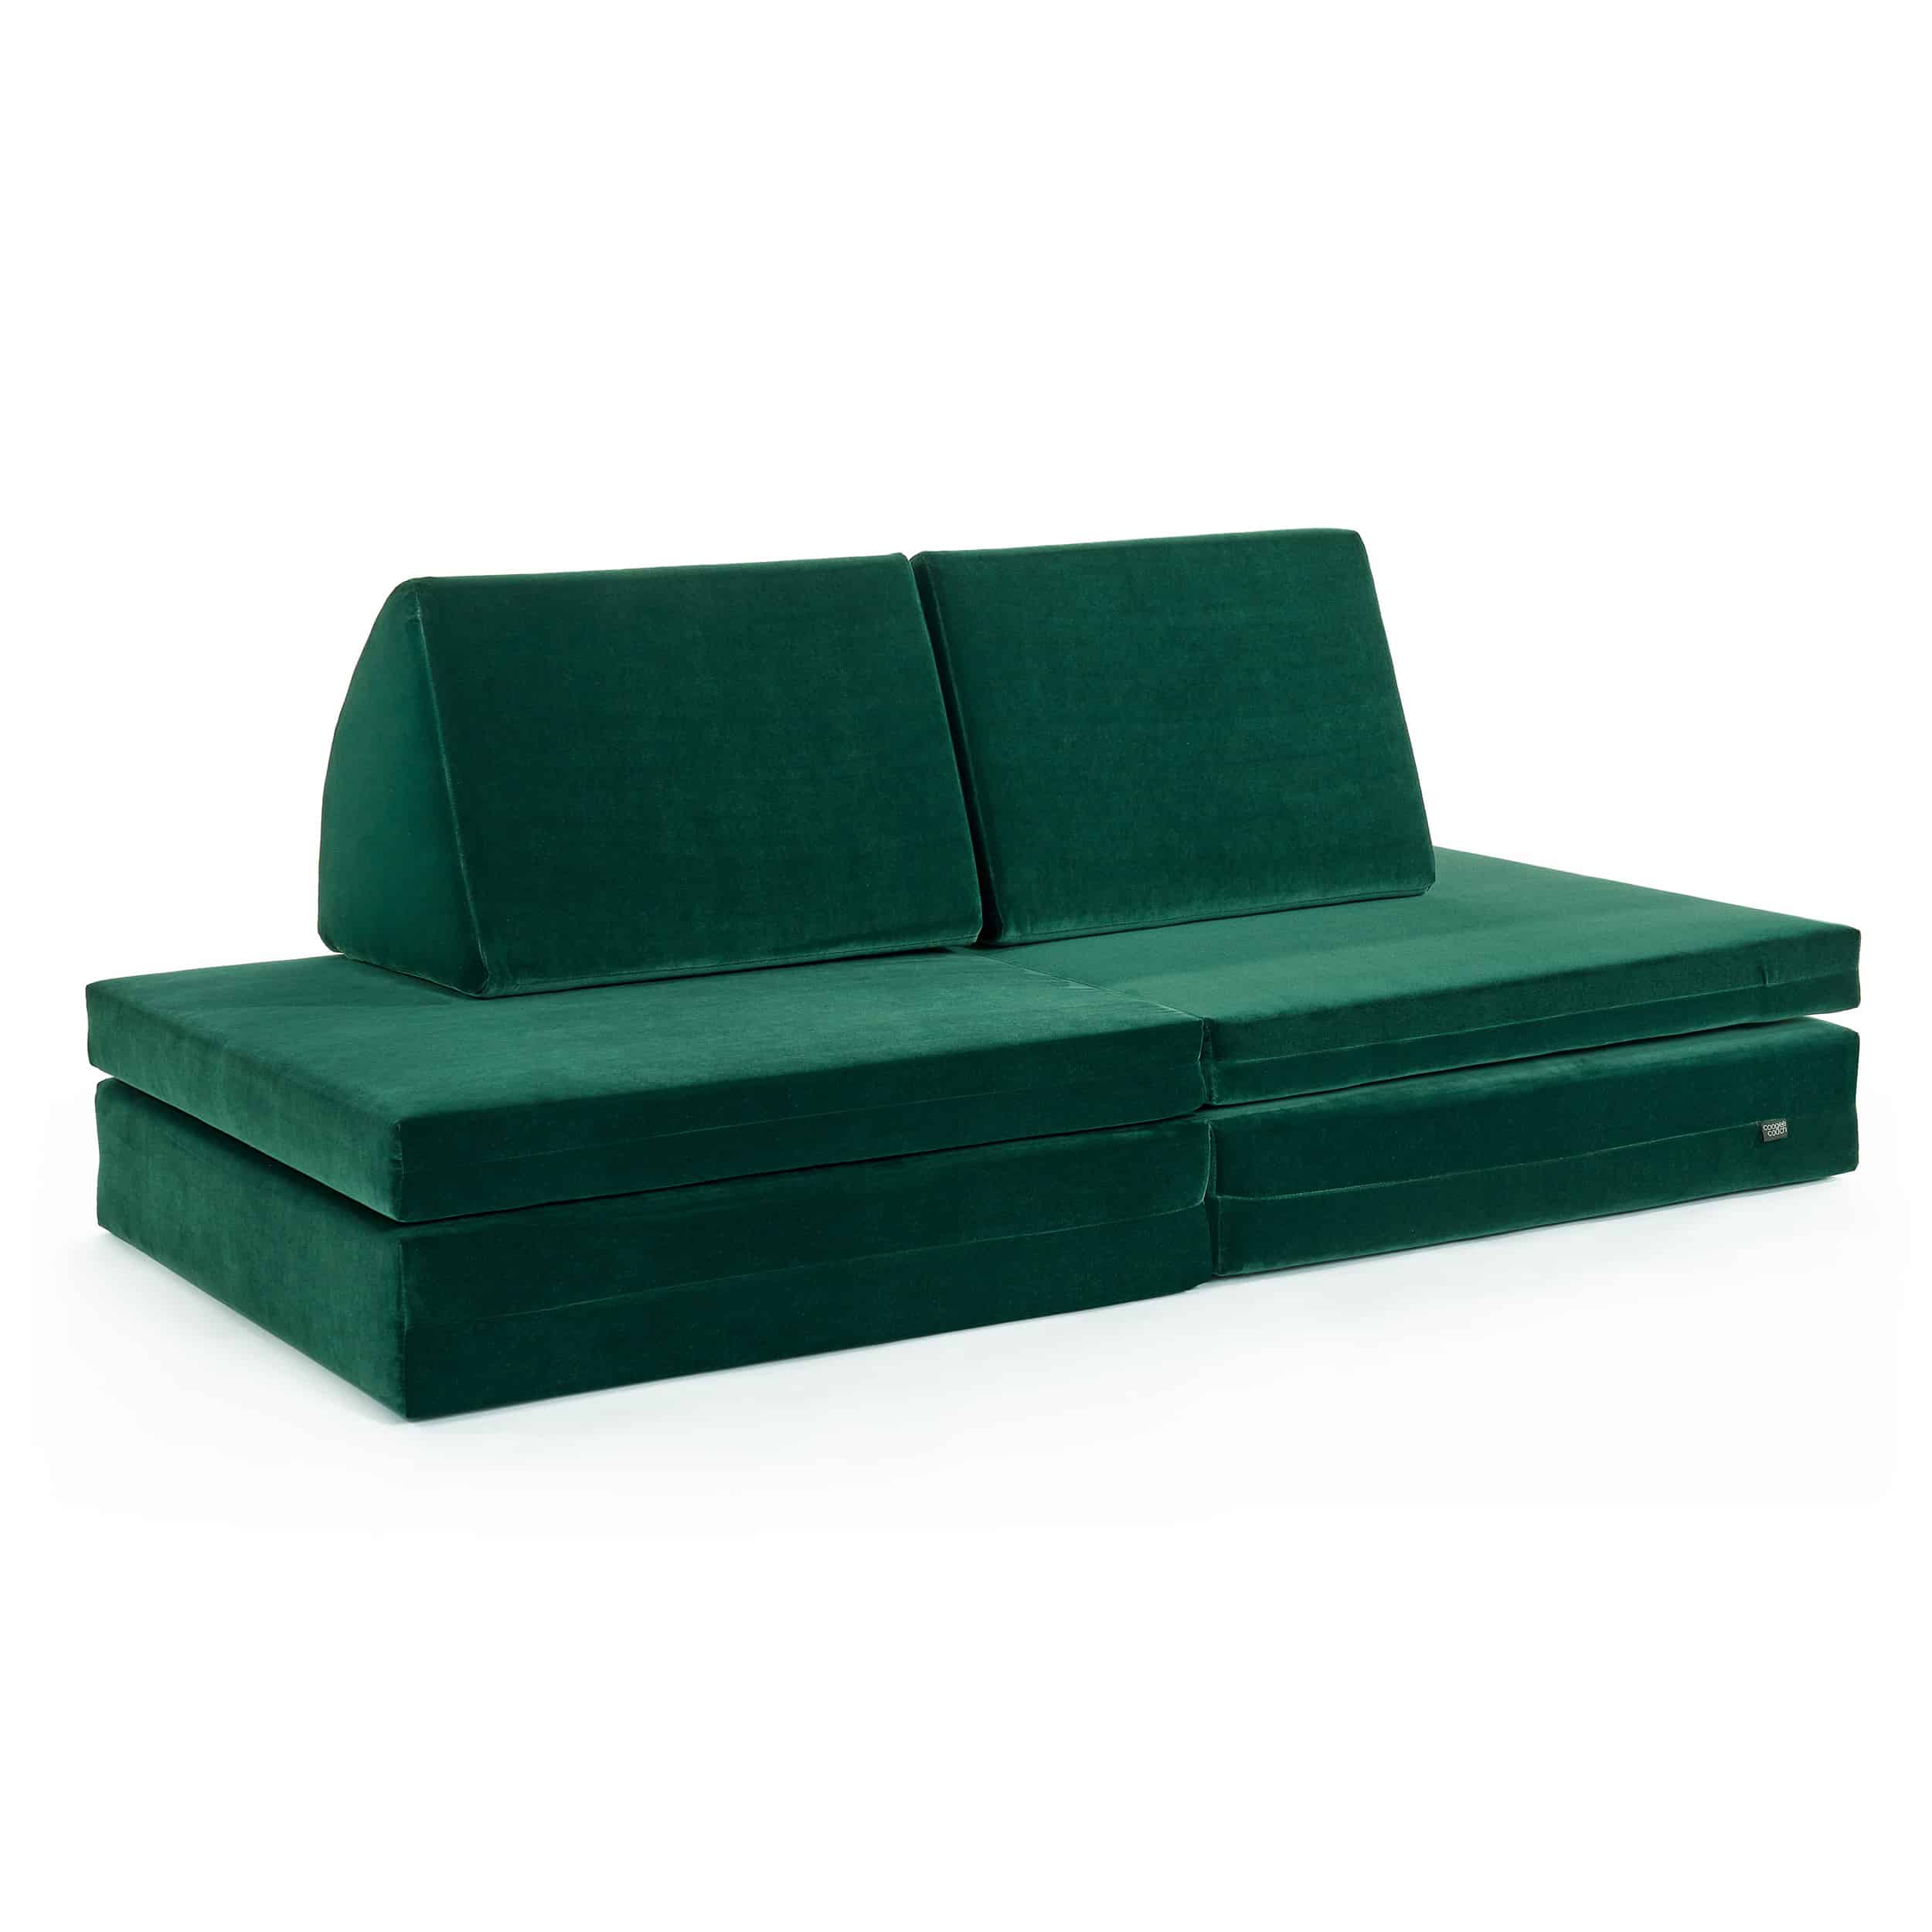 coogeecouch | kids sofa | series: wildwildwoods | color: pine-green green | view: front slanted | made in Germany